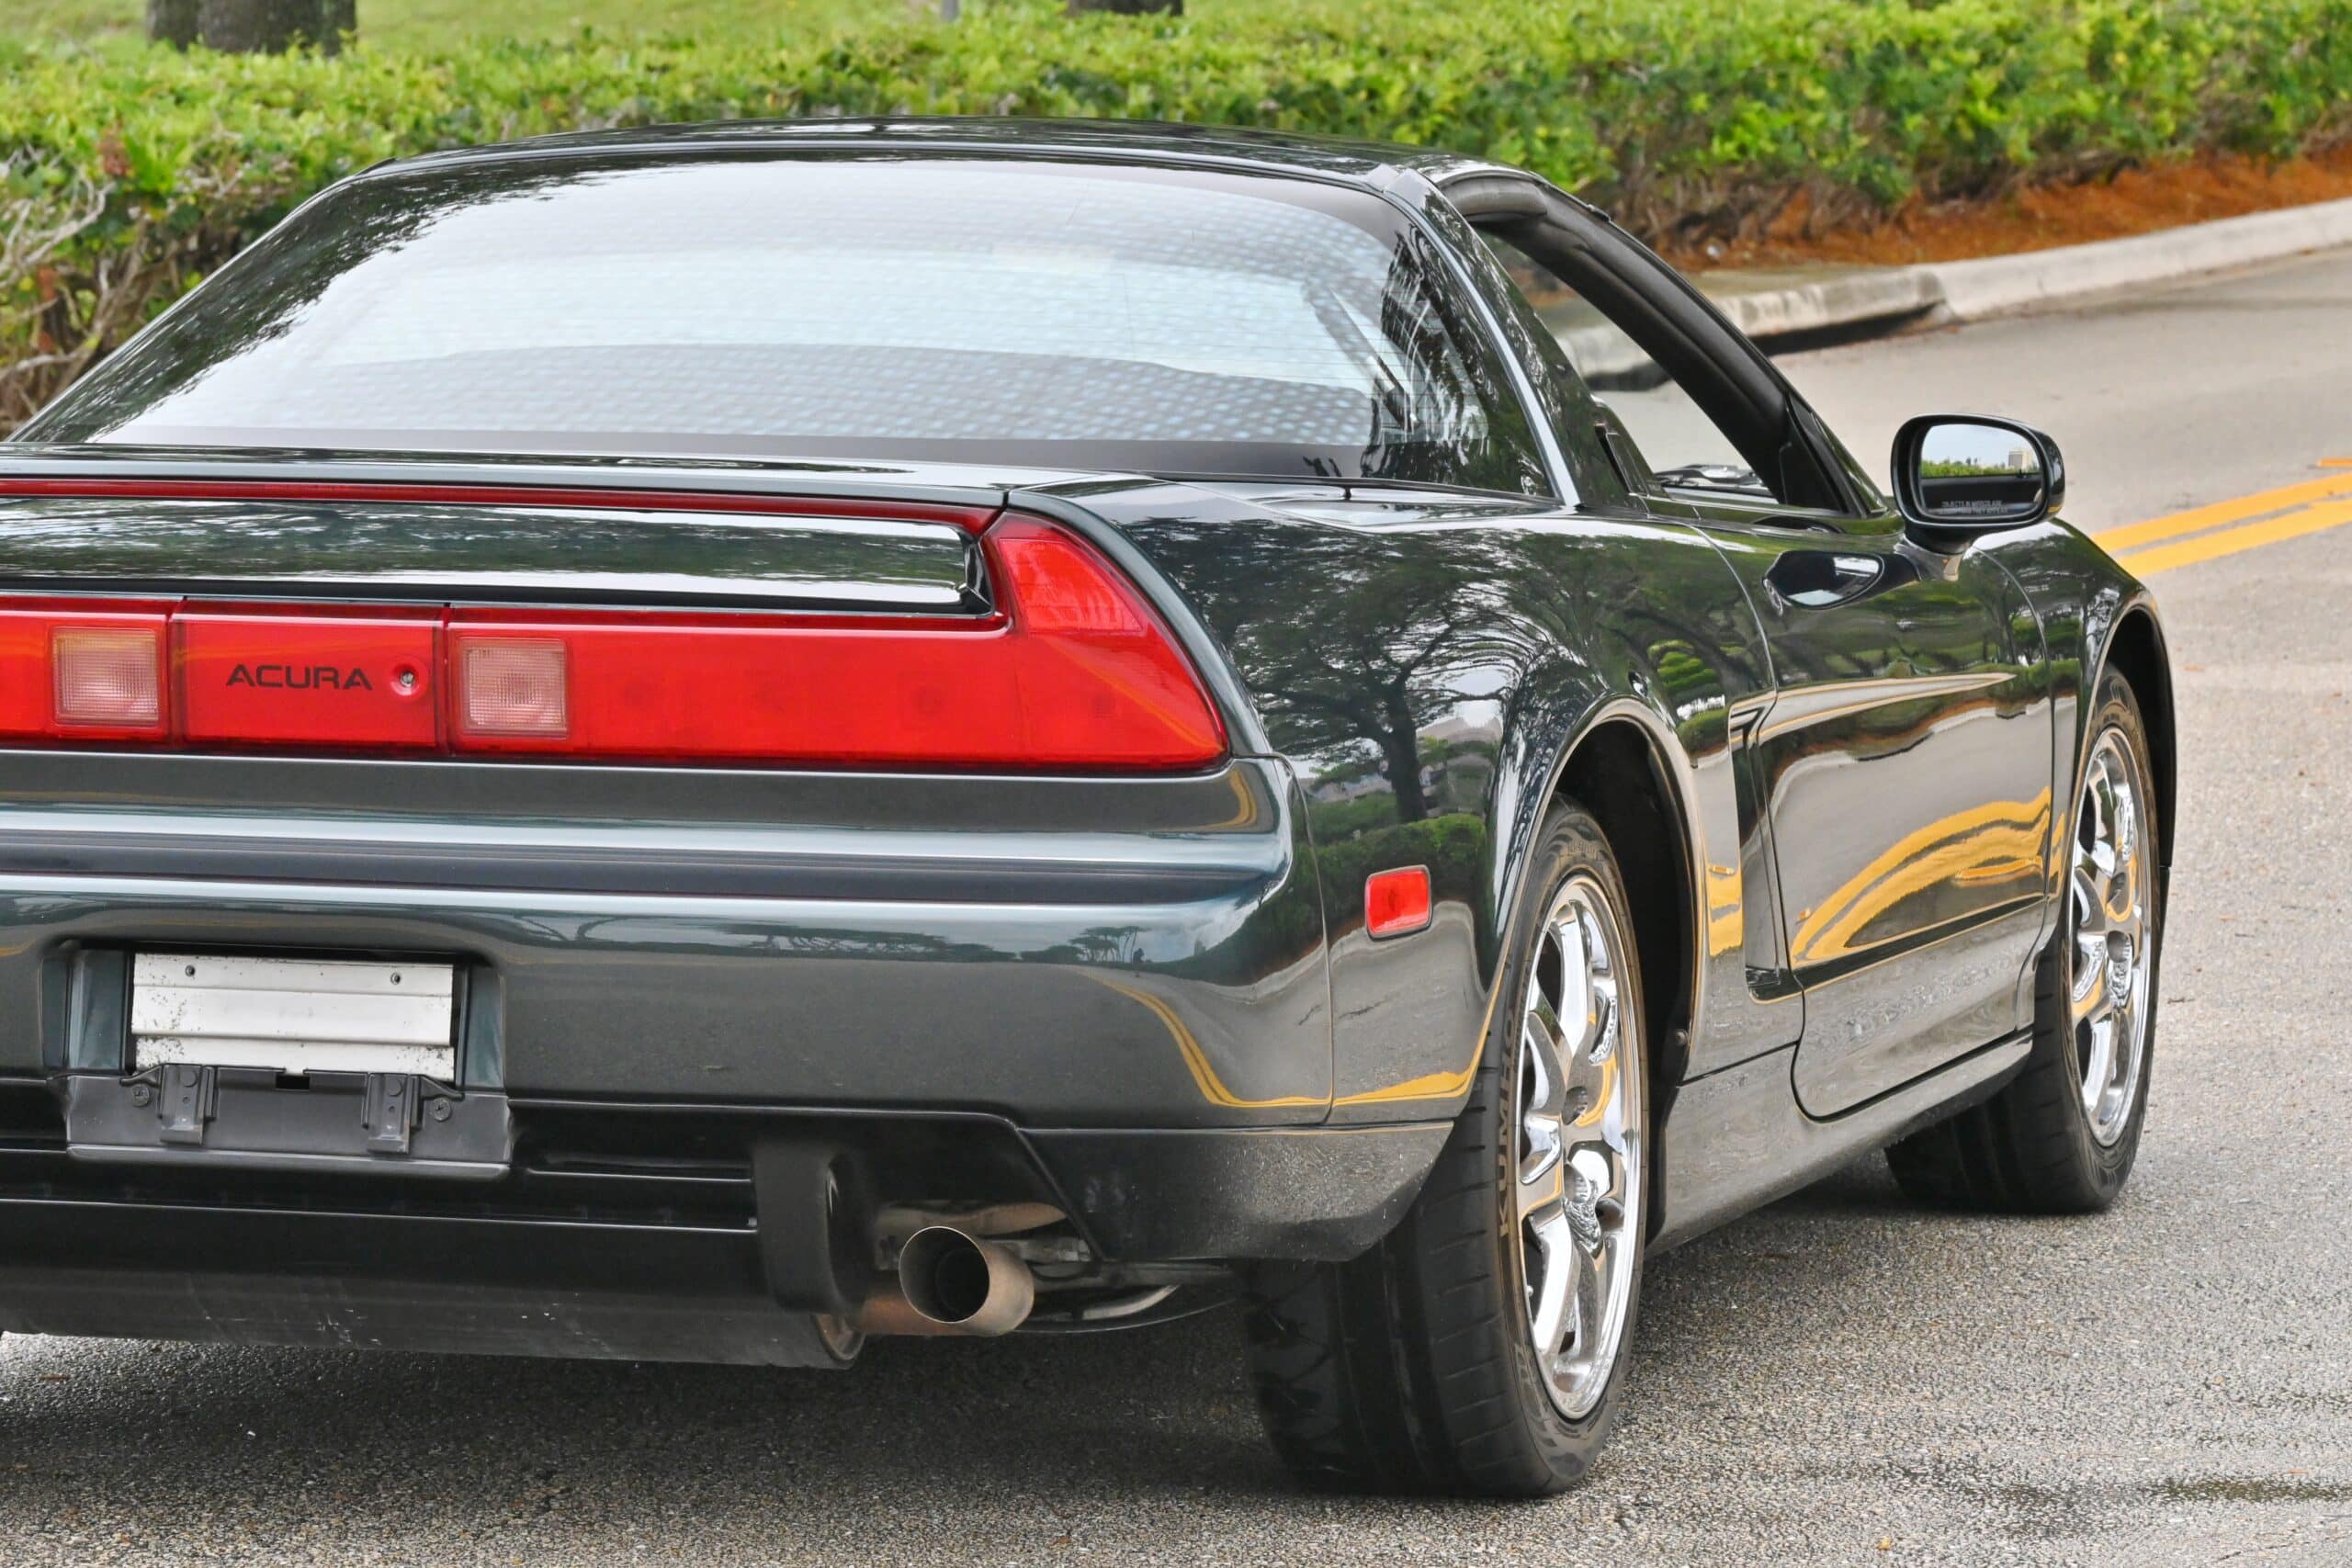 1995 Acura NSX T 1 of 67 In This Color Combo-Only 56K Miles -5 Speed Manual-100% Stock -Like New